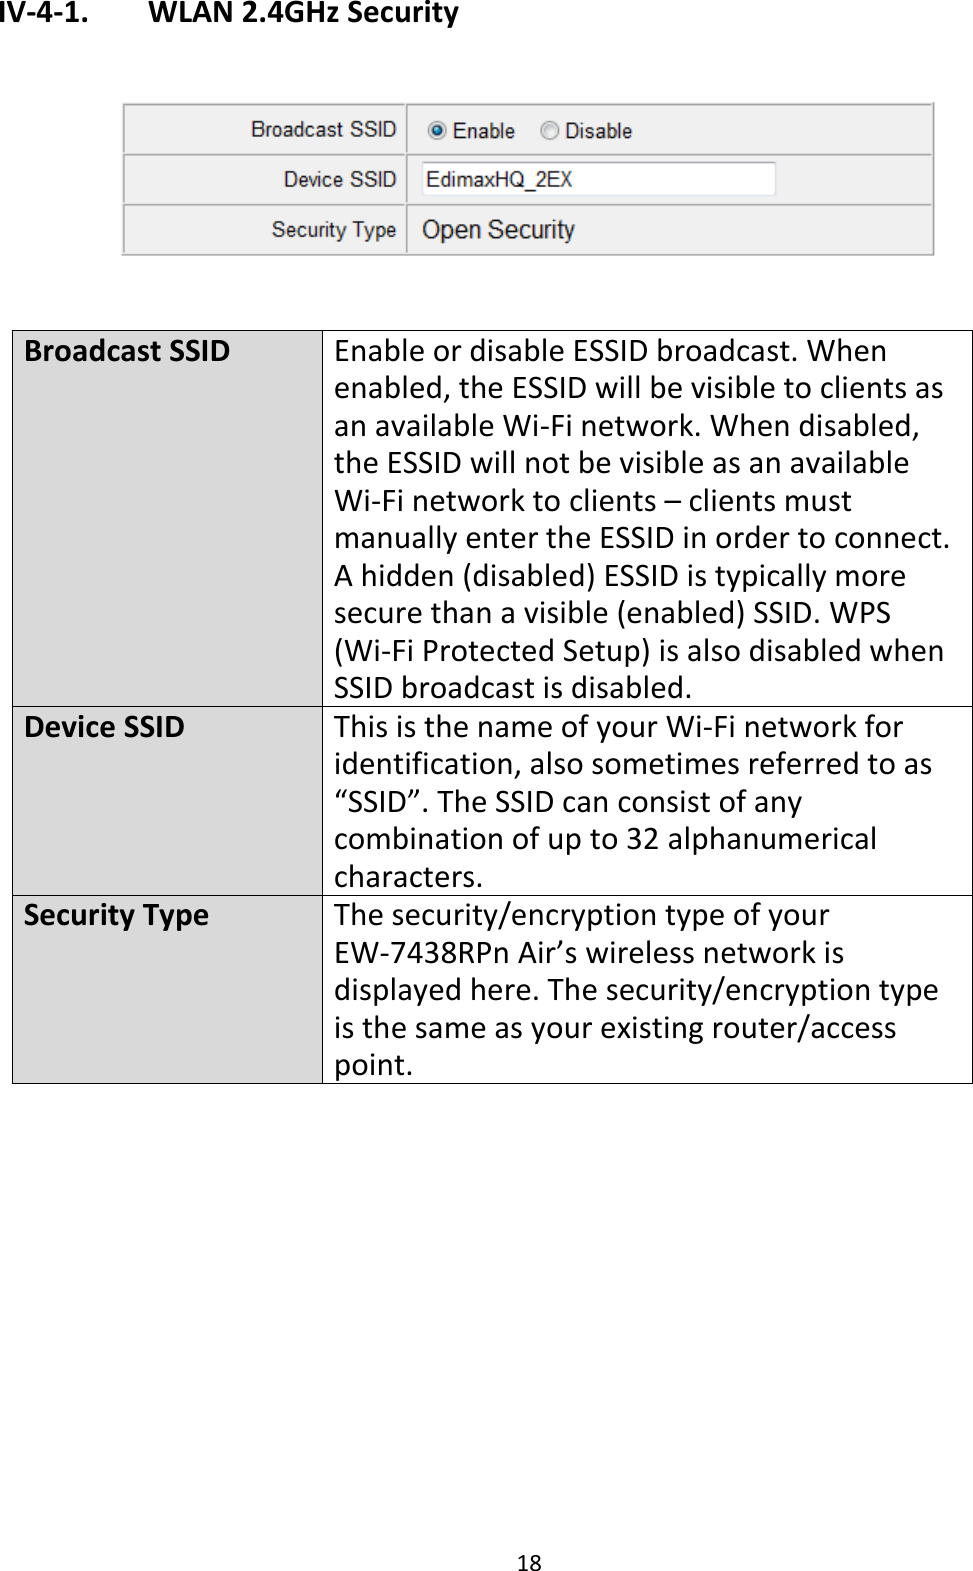 18 IV-4-1.    WLAN 2.4GHz Security    Broadcast SSID Enable or disable ESSID broadcast. When enabled, the ESSID will be visible to clients as an available Wi-Fi network. When disabled, the ESSID will not be visible as an available Wi-Fi network to clients – clients must manually enter the ESSID in order to connect. A hidden (disabled) ESSID is typically more secure than a visible (enabled) SSID. WPS (Wi-Fi Protected Setup) is also disabled when SSID broadcast is disabled. Device SSID This is the name of your Wi-Fi network for identification, also sometimes referred to as “SSID”. The SSID can consist of any combination of up to 32 alphanumerical characters. Security Type The security/encryption type of your EW-7438RPn Air’s wireless network is displayed here. The security/encryption type is the same as your existing router/access point.   